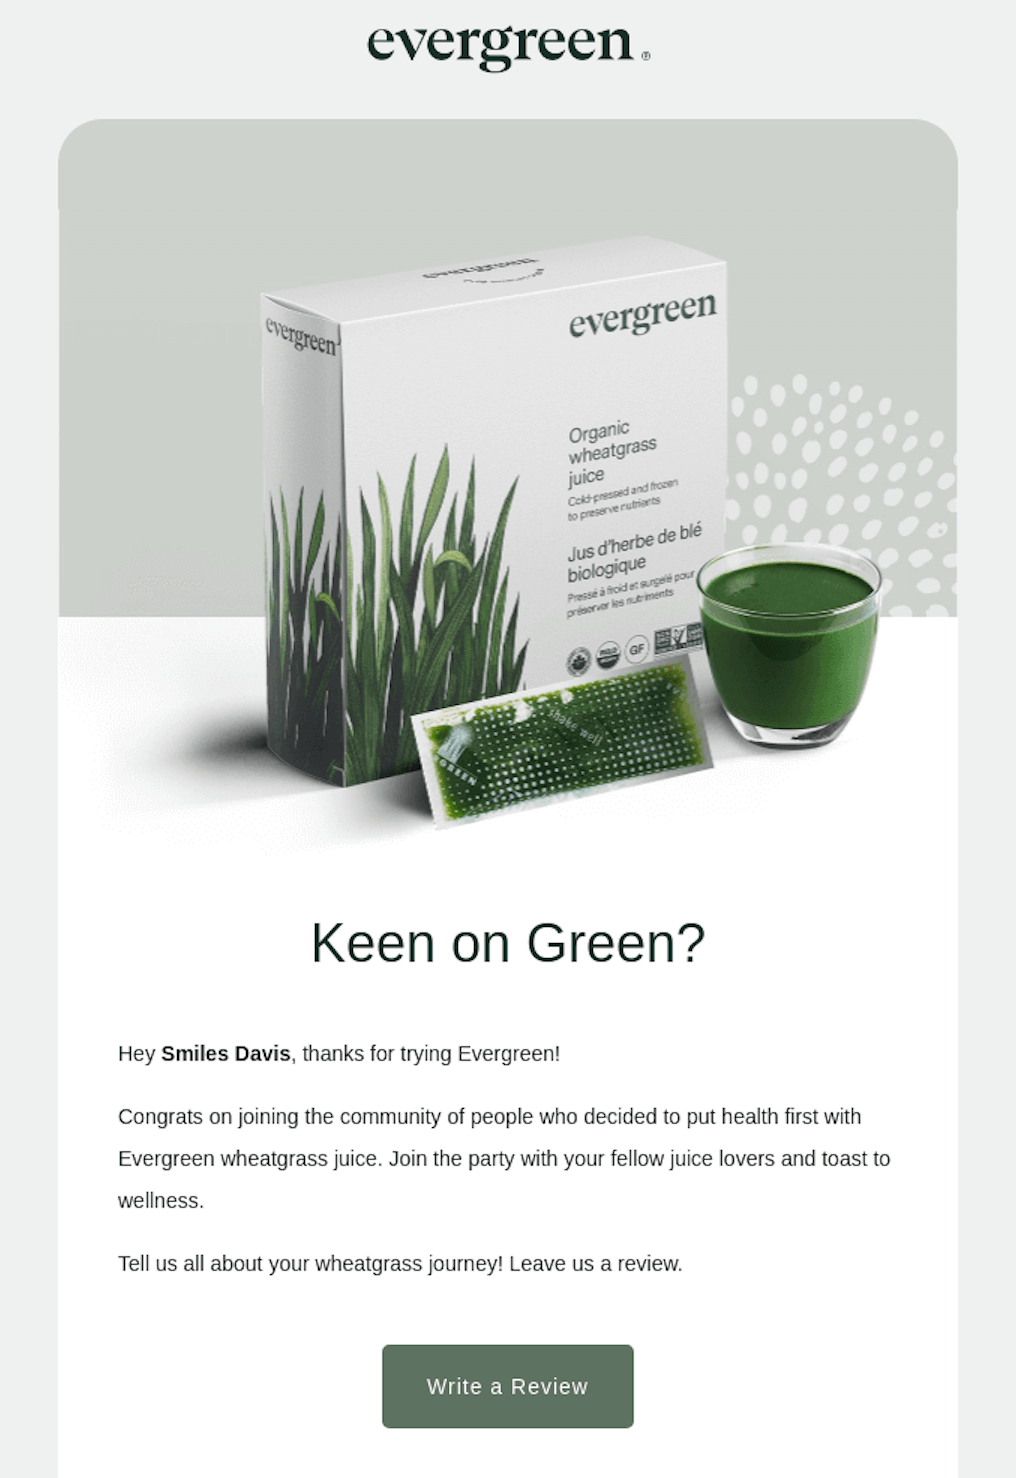 EvergreenJuices_review_request_email_example